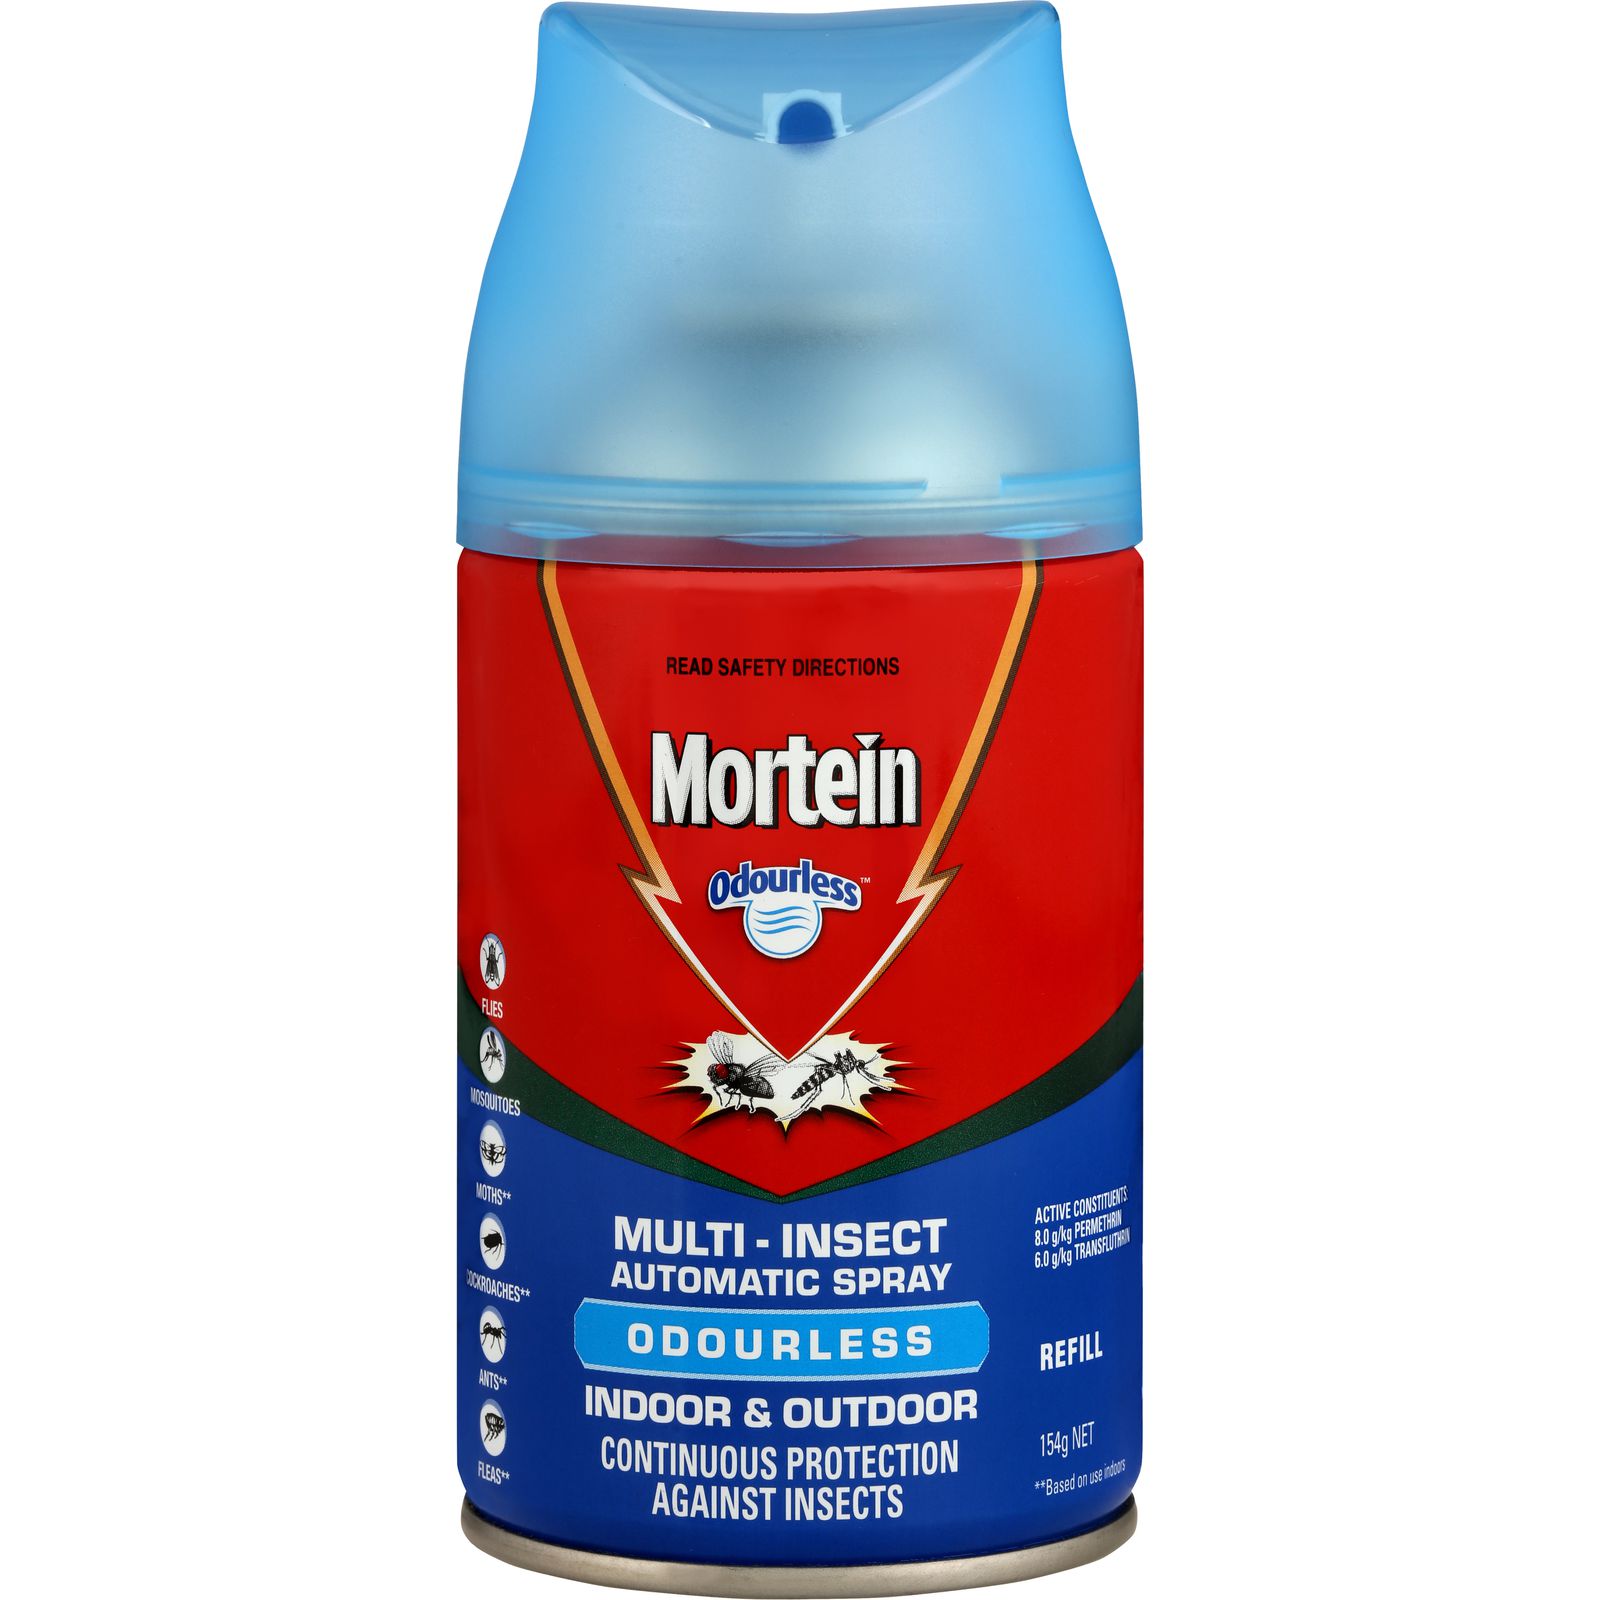 Mortein Odourless Automatic Indoor & Outdoor Insect Control Gadget & Refill 154g